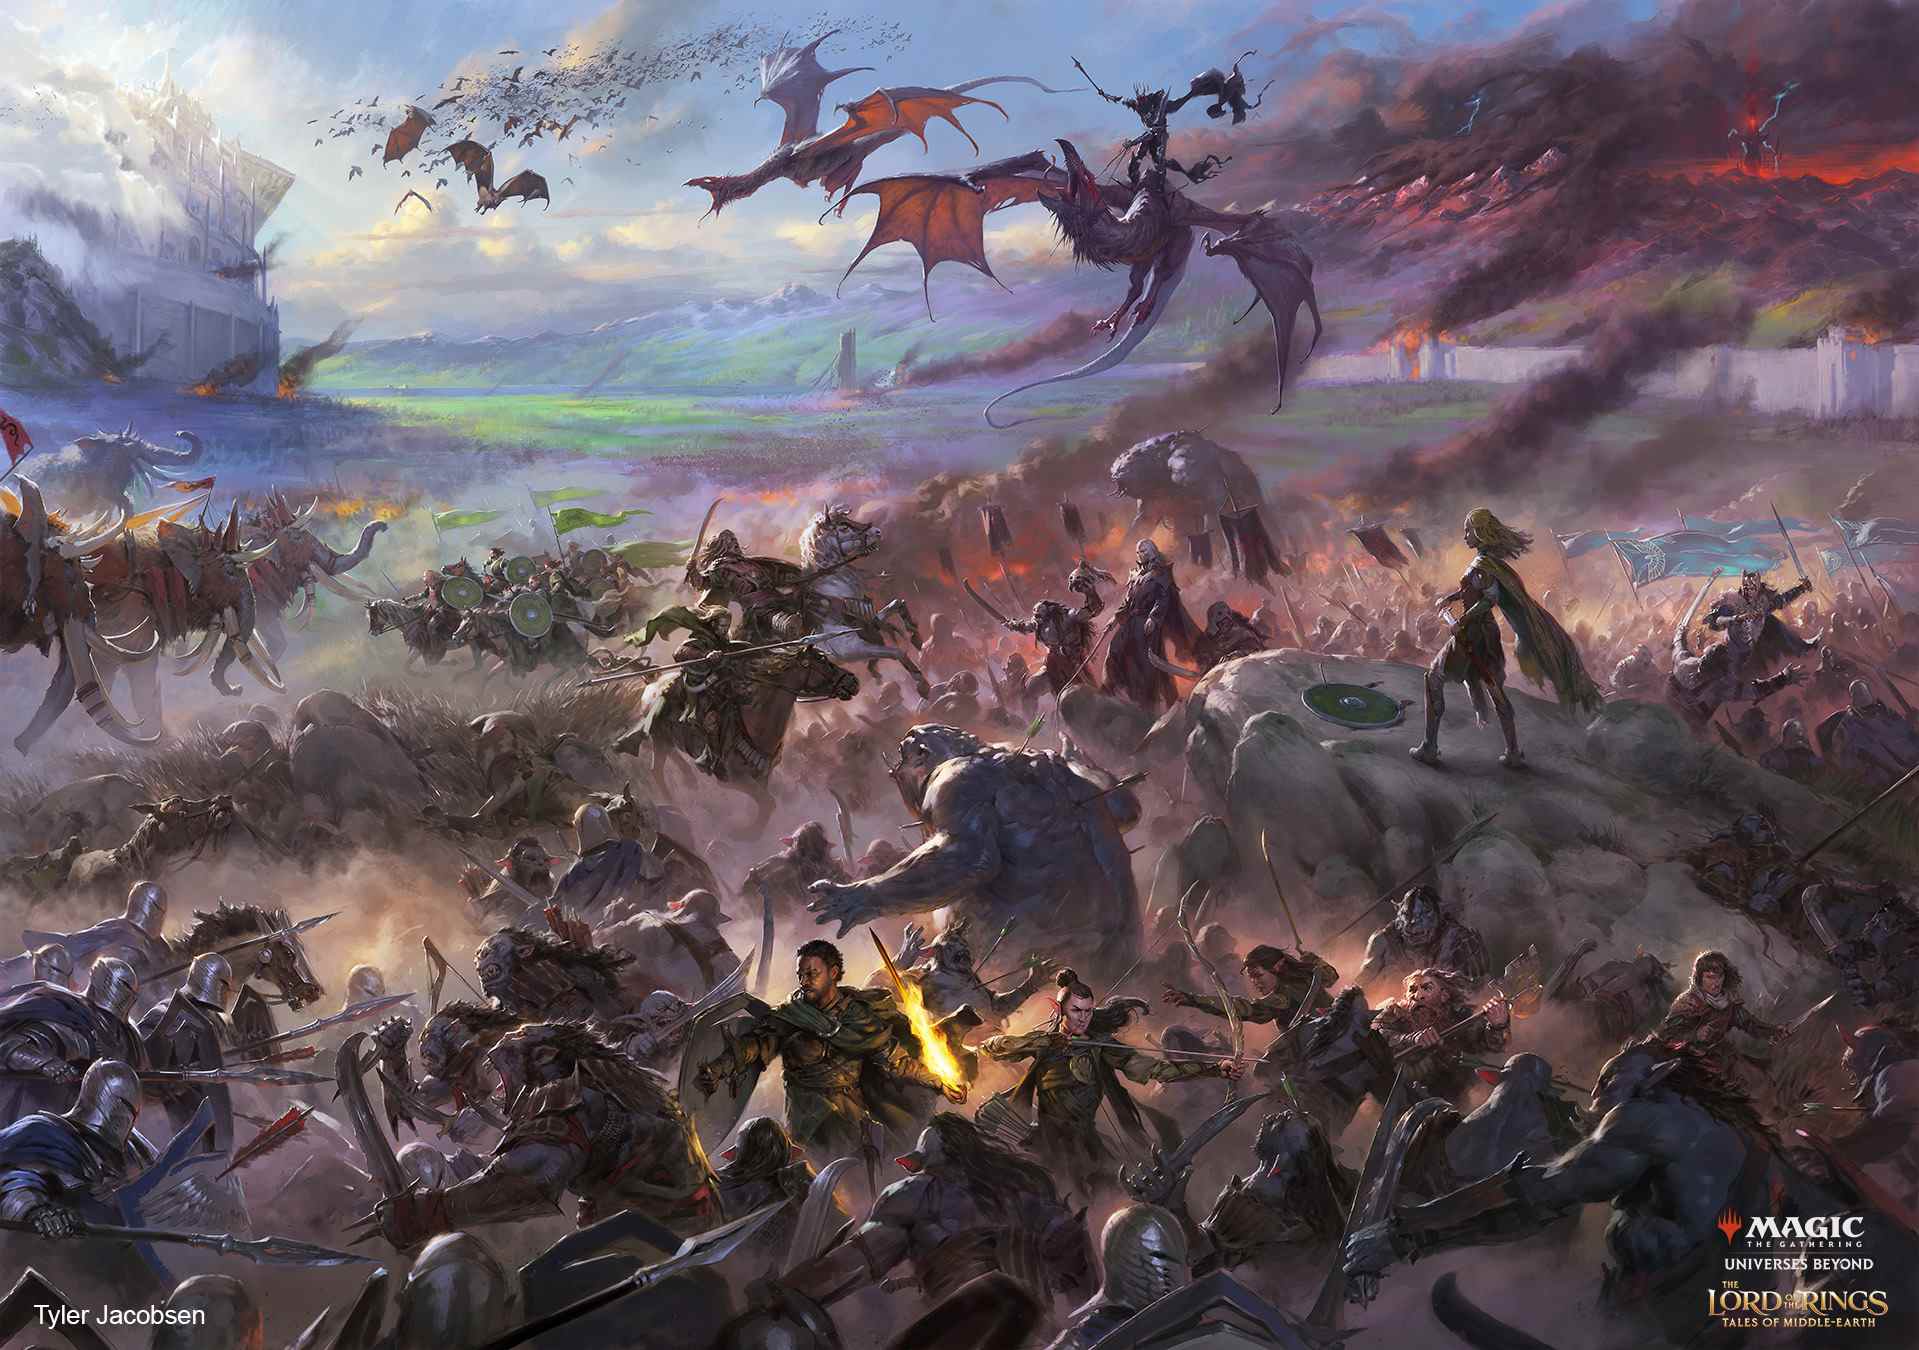 Une image d'art de carte de Magic: The Gathering's Lord of the Rings: Tales of Middle-earth card set.